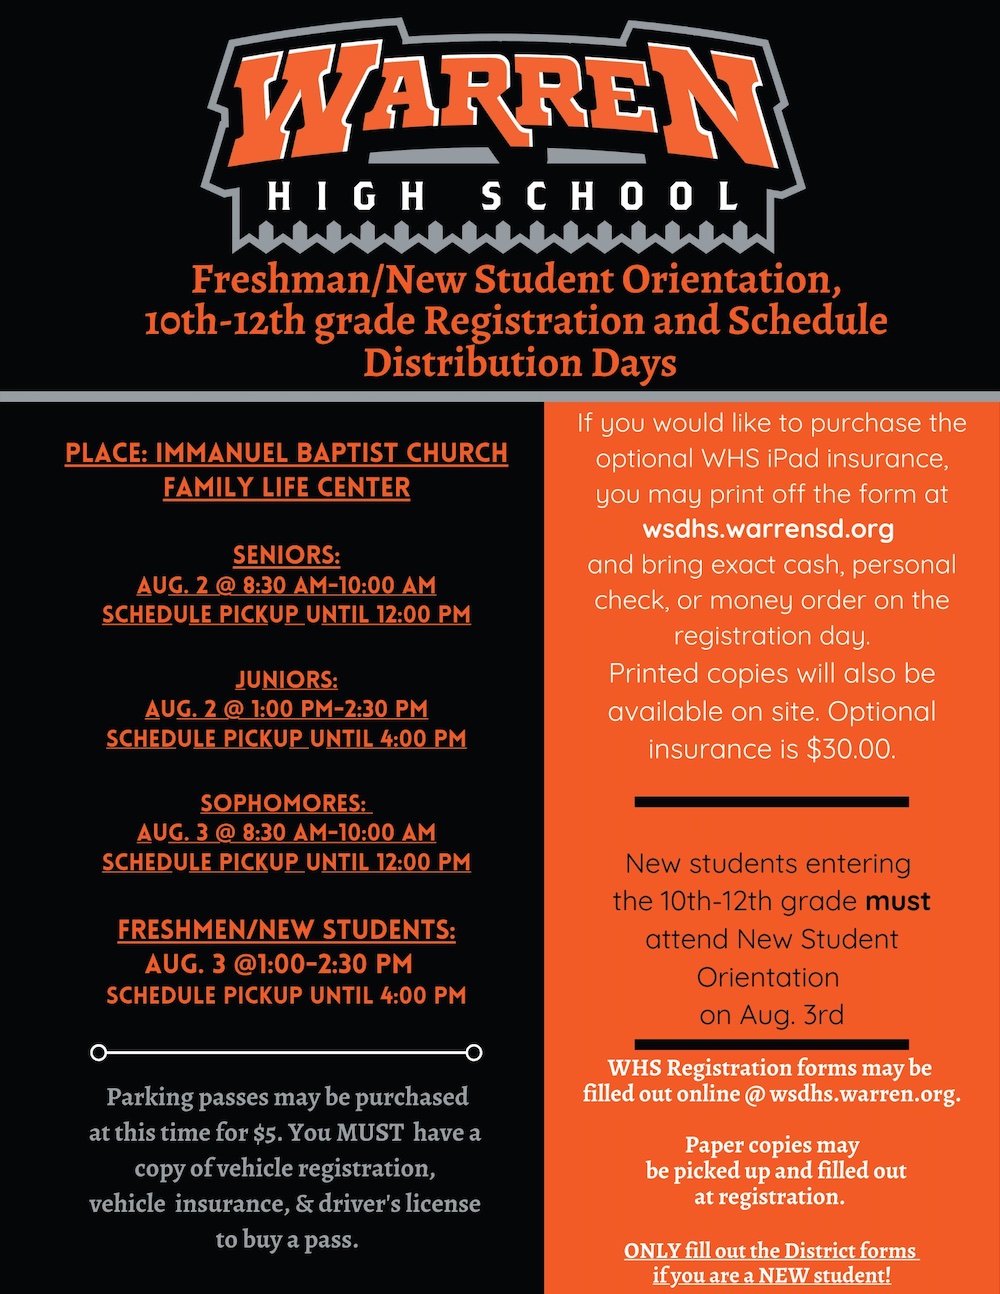 WHS freshman and new student orientation details